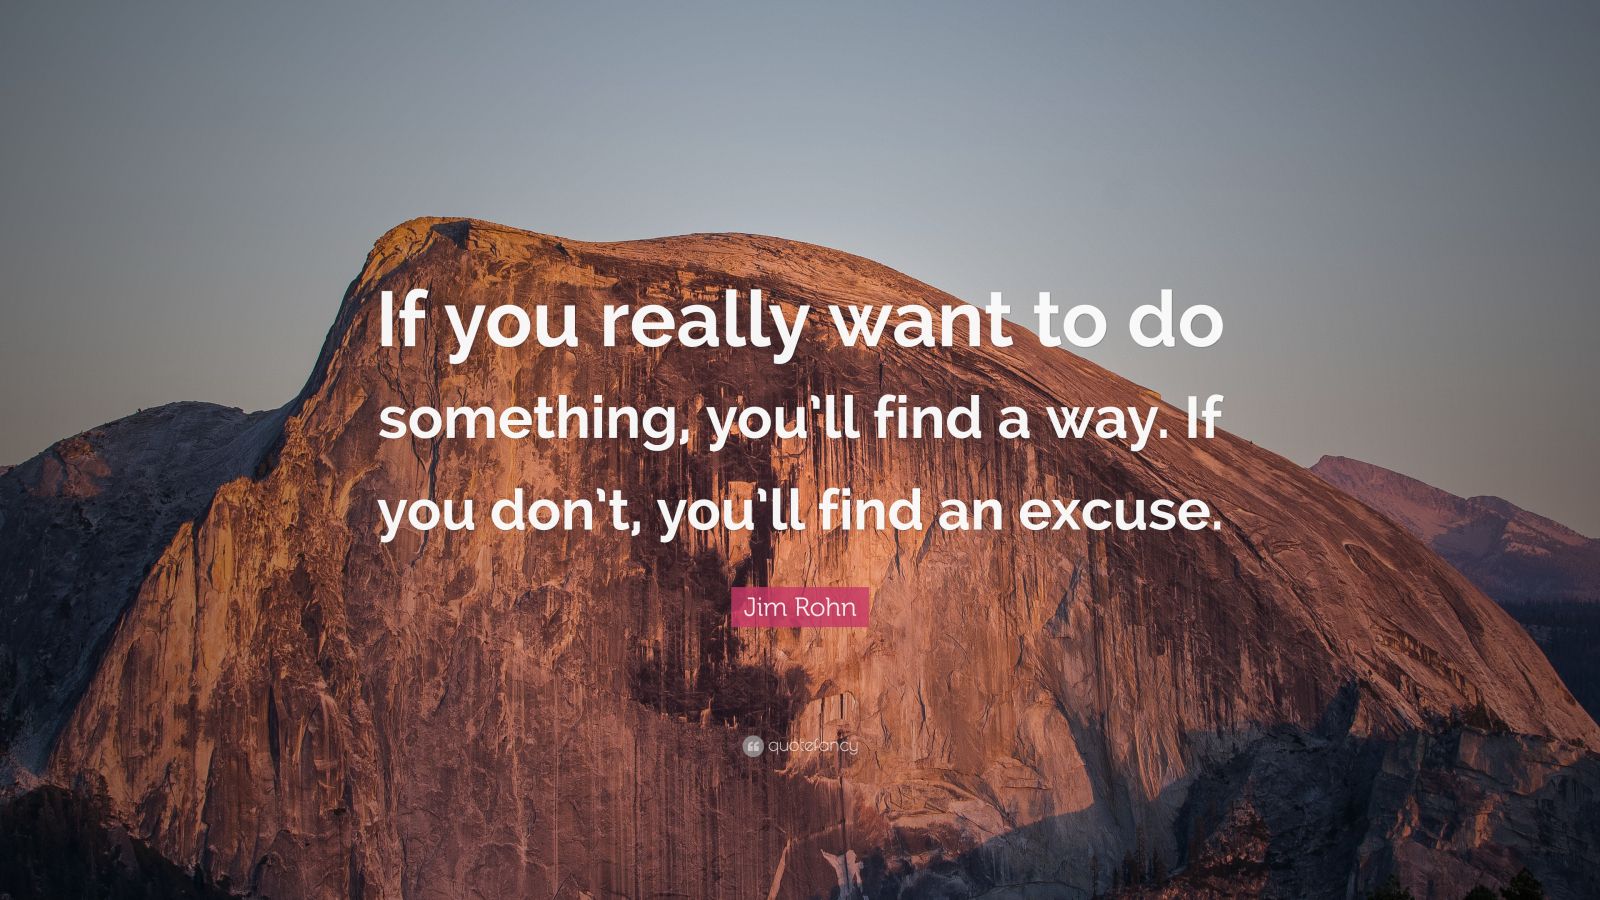 Jim Rohn Quote If You Really Want To Do Something Youll Find A Way If You Dont Youll